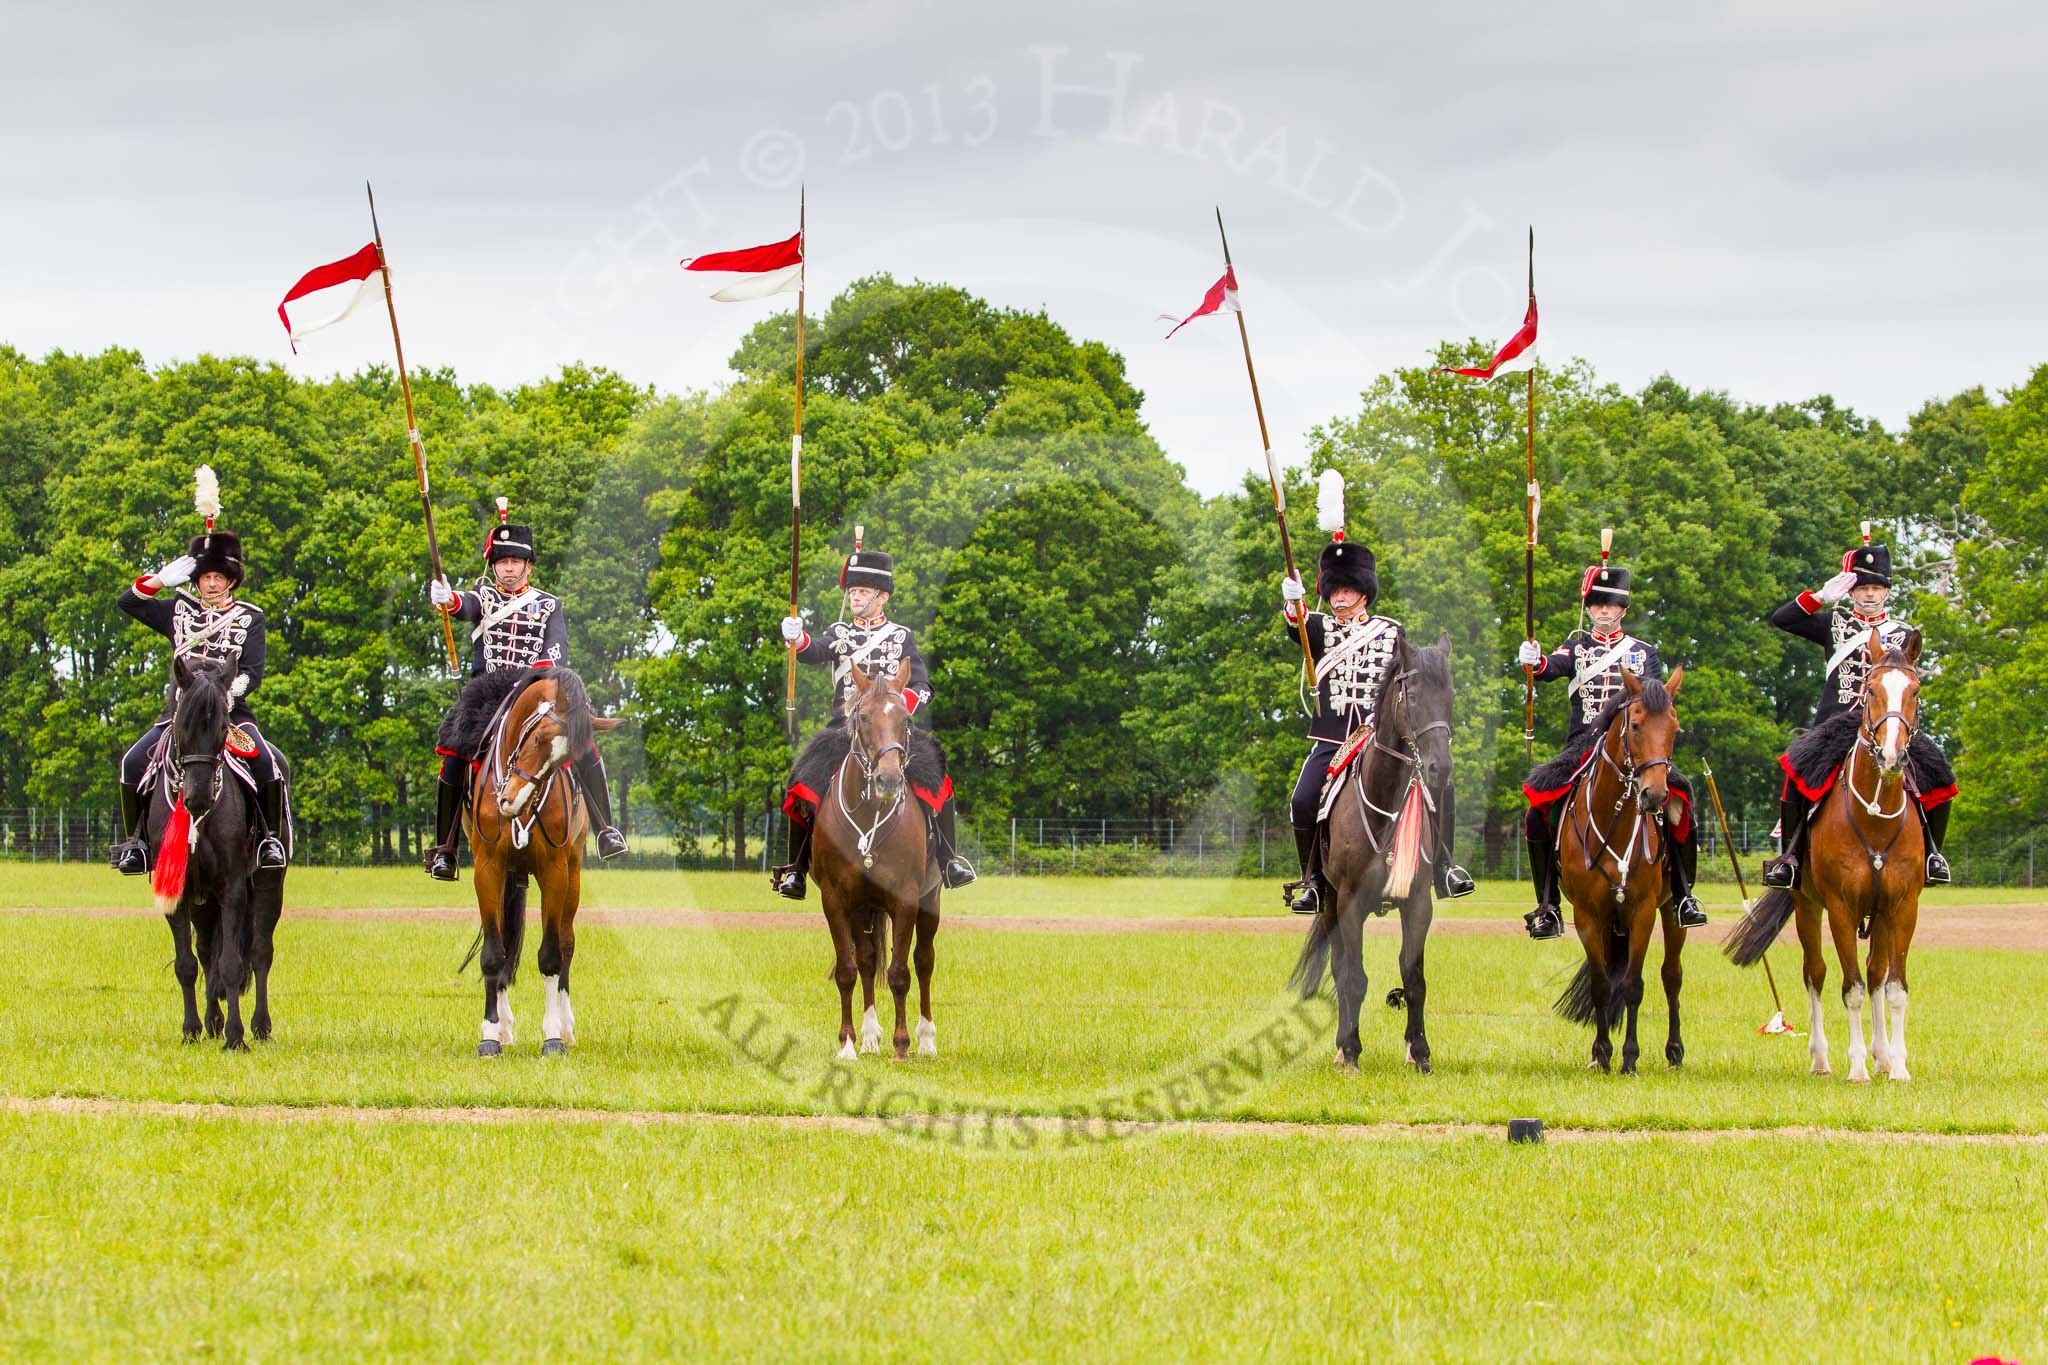 The Light Cavalry HAC Annual Review and Inspection 2013.
Windsor Great Park Review Ground,
Windsor,
Berkshire,
United Kingdom,
on 09 June 2013 at 14:39, image #570